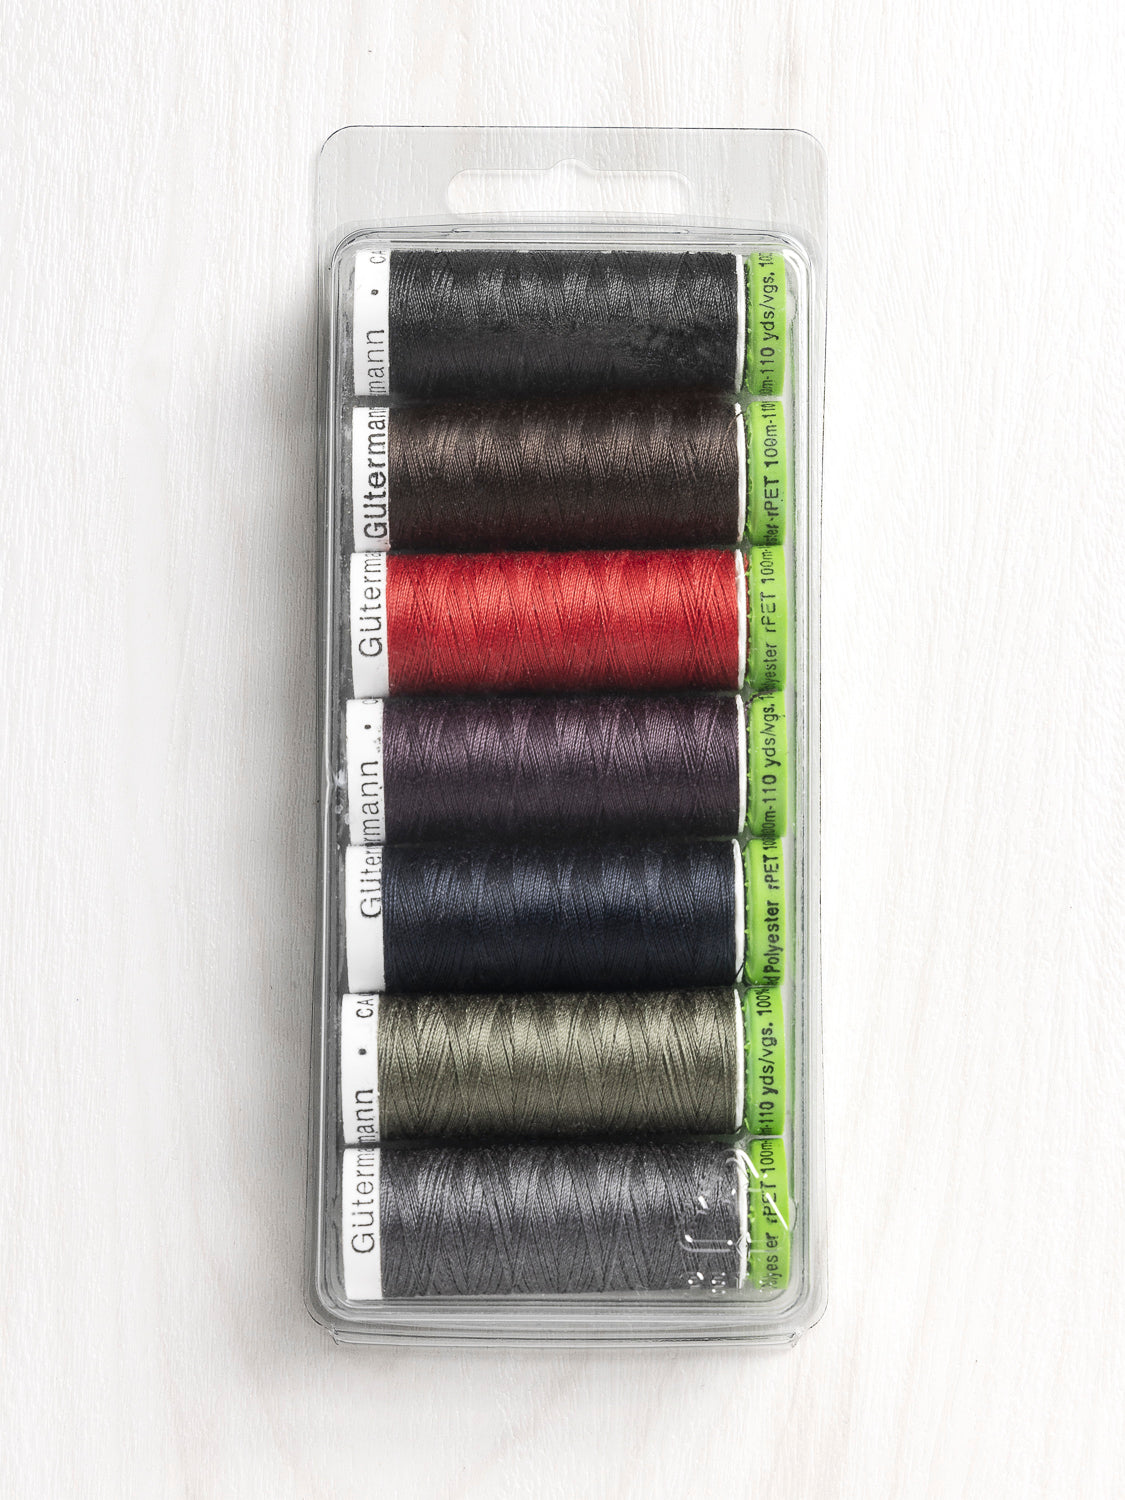 Sew-all Thread Set - Gutermann - Basic Colors 20 spools - The Sewing Place